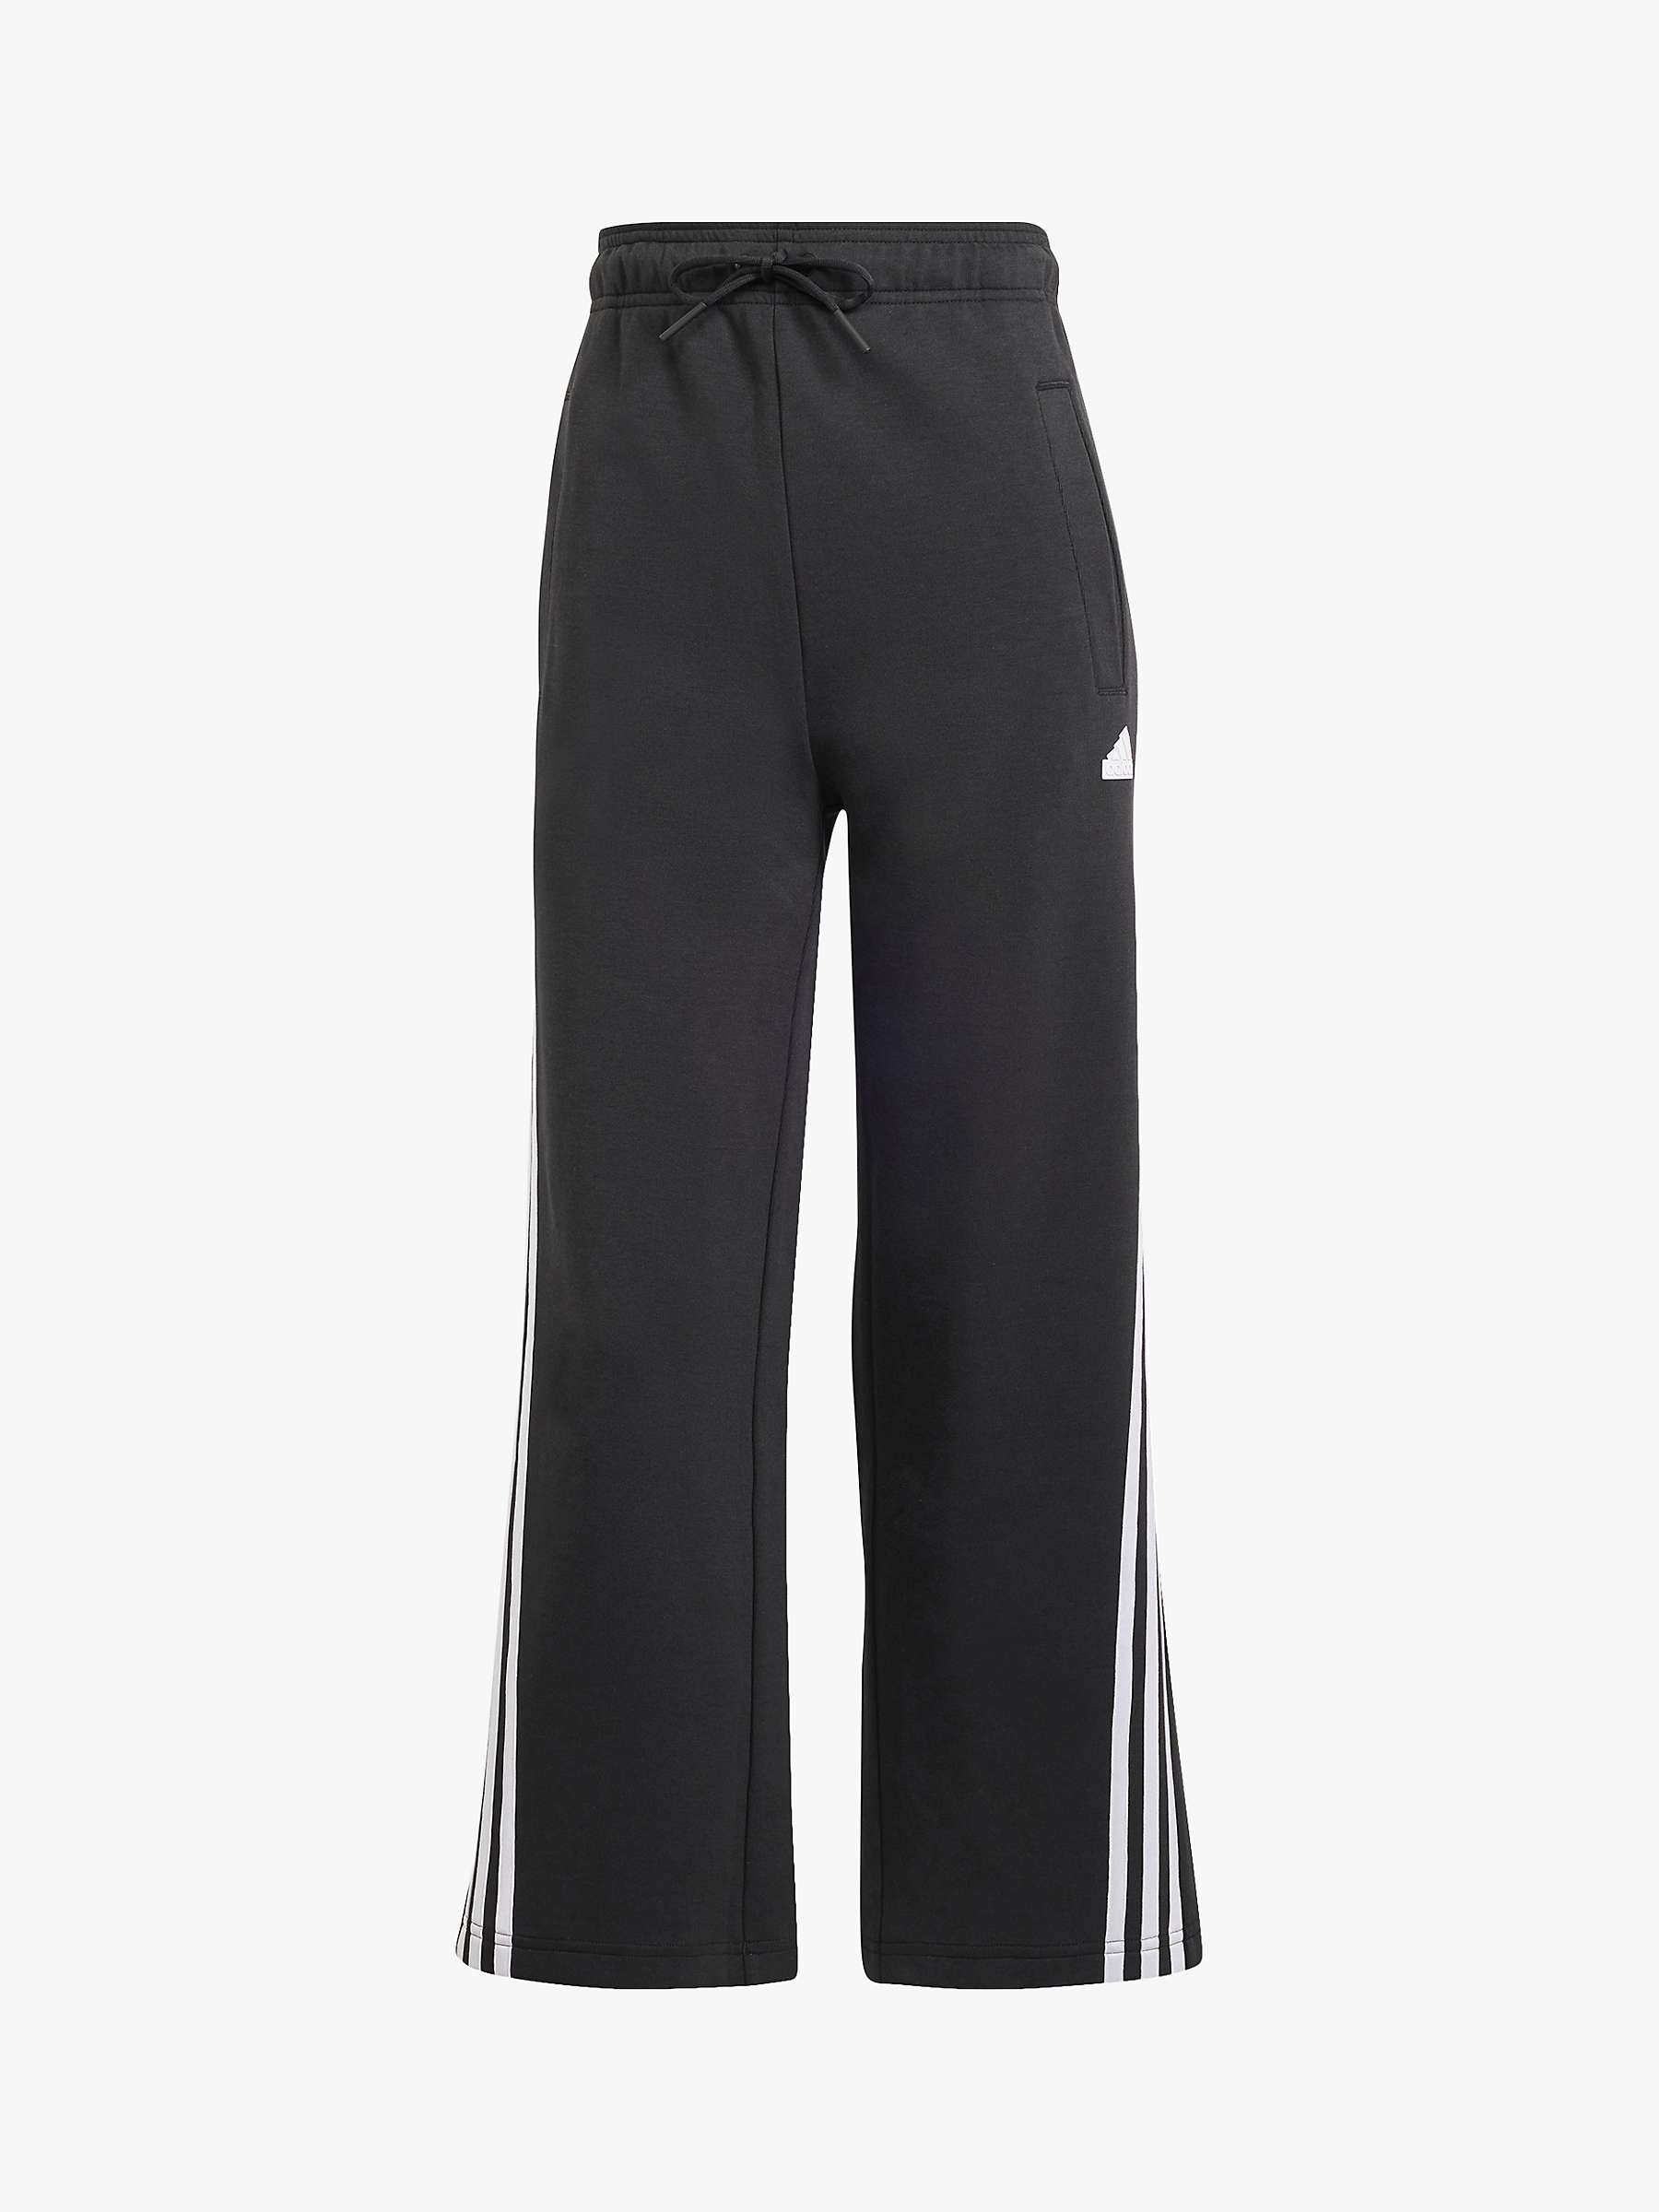 Buy adidas Future Icons 3-Stripes Joggers, Black Online at johnlewis.com